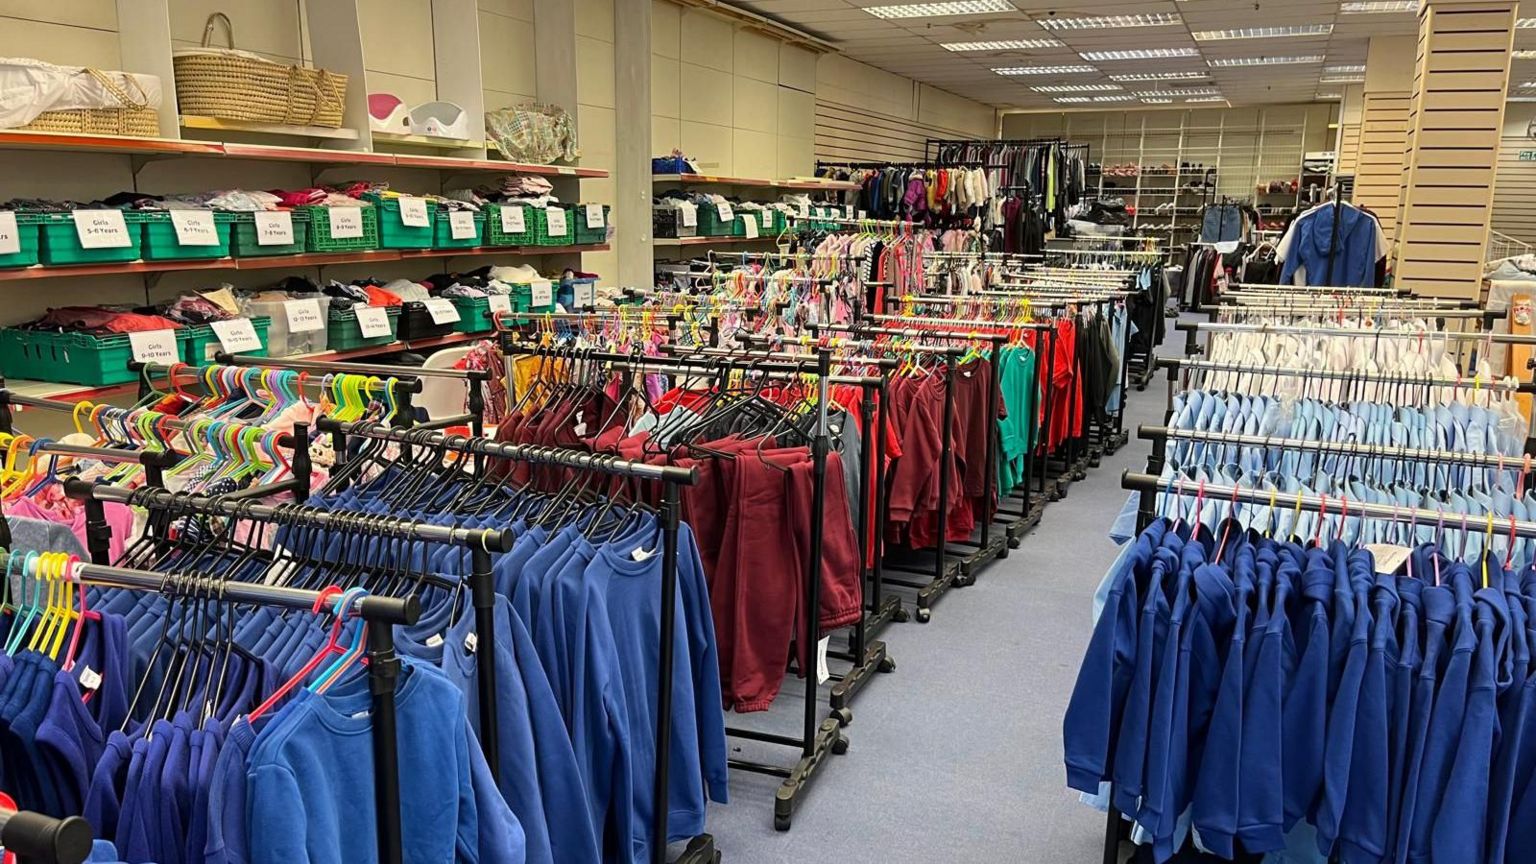 Old shop floor filled with uniforms on rails